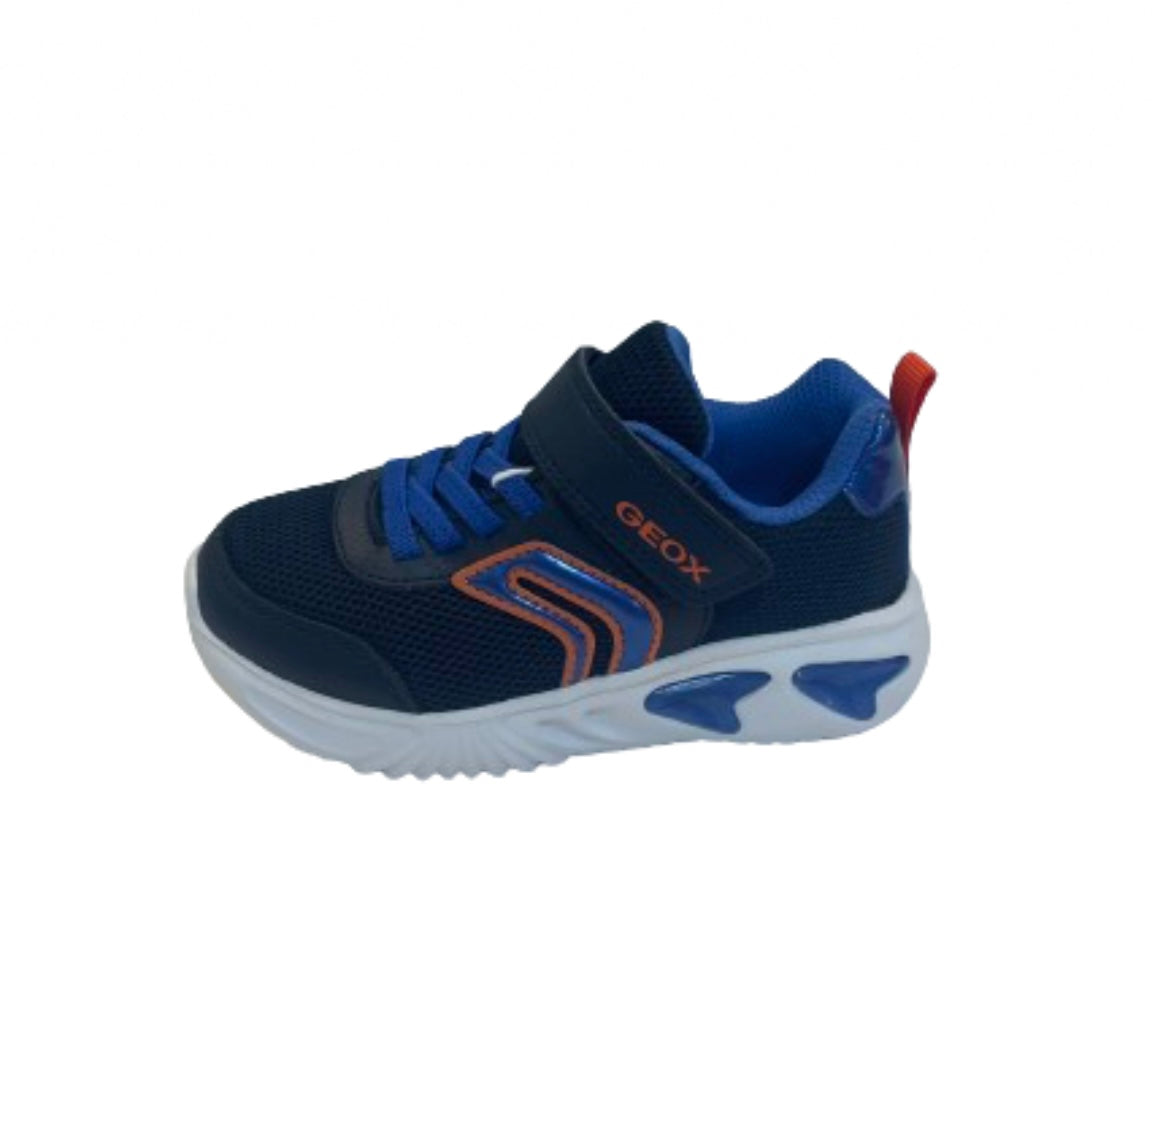 Geox J Assister Blue Trainer